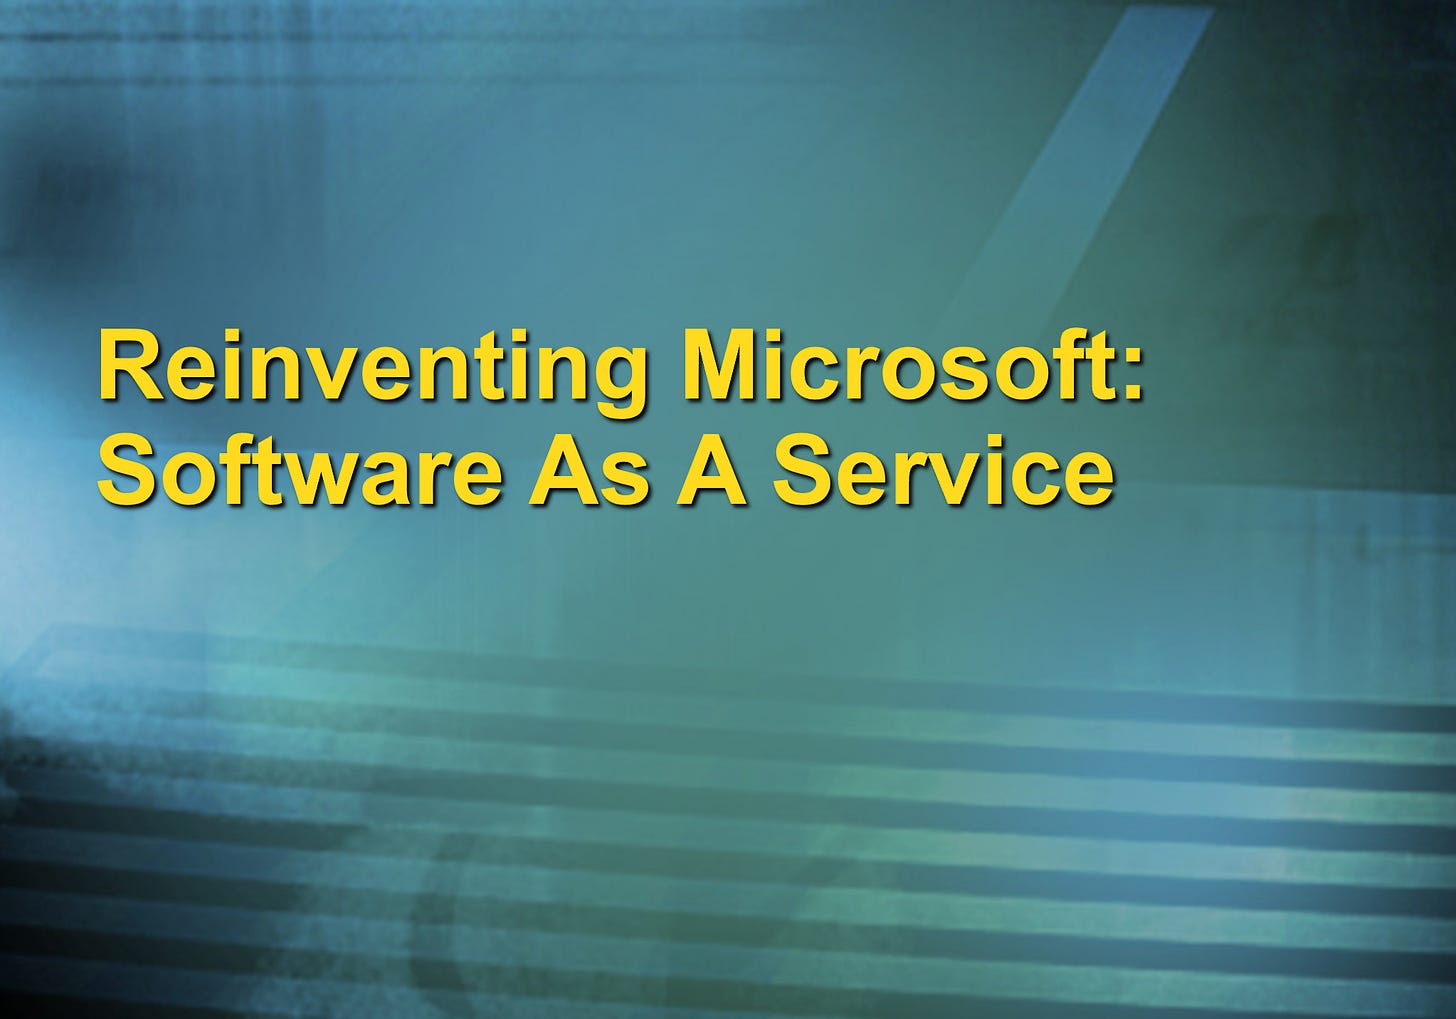 Reinventing Microsoft: Software As A Service